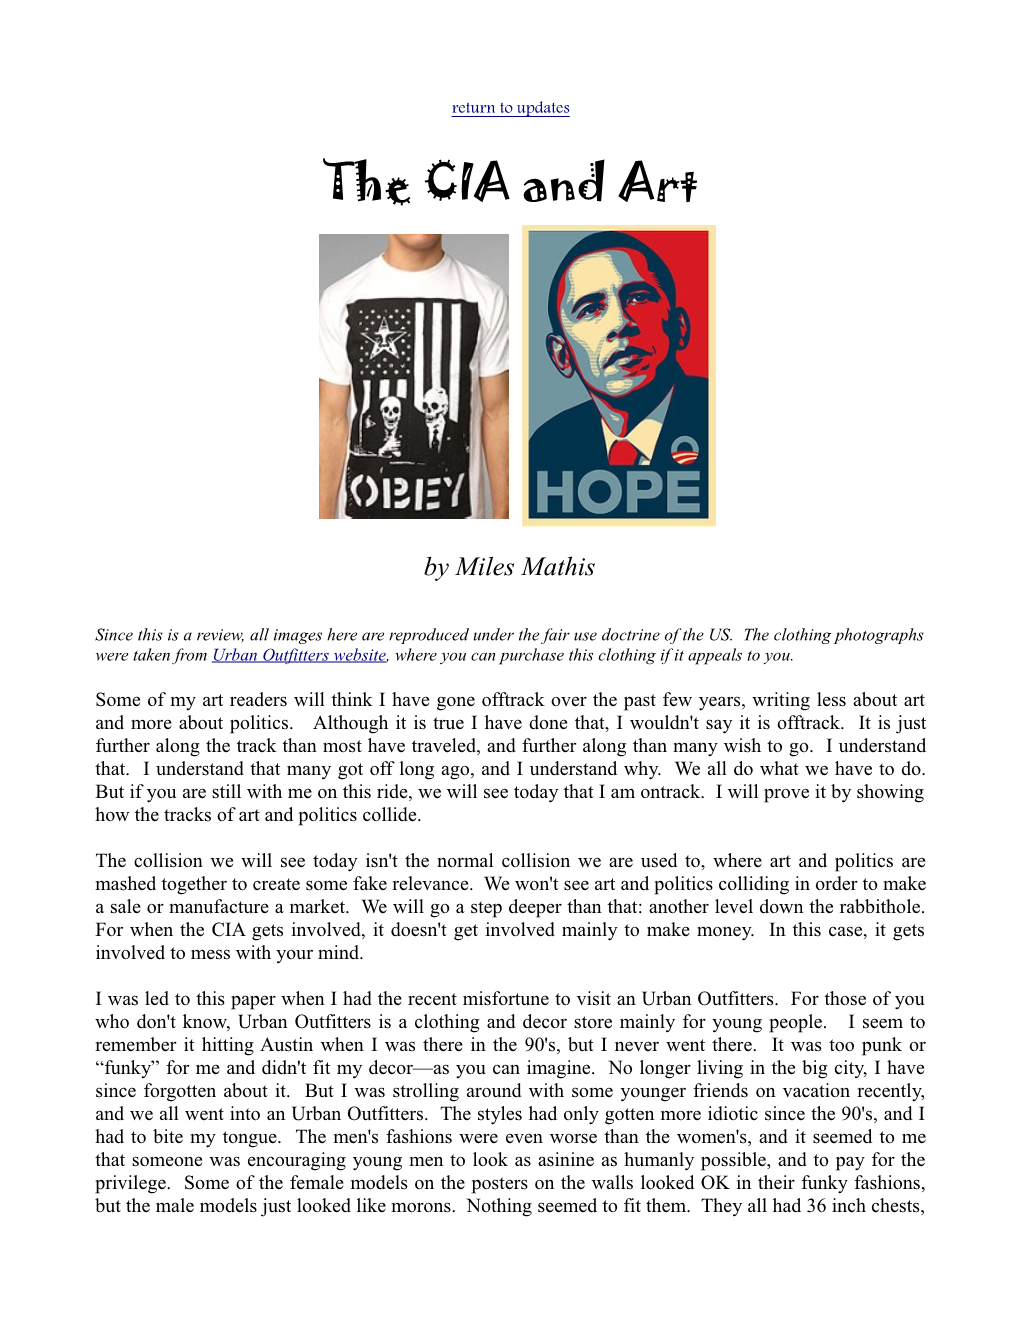 The CIA and Art